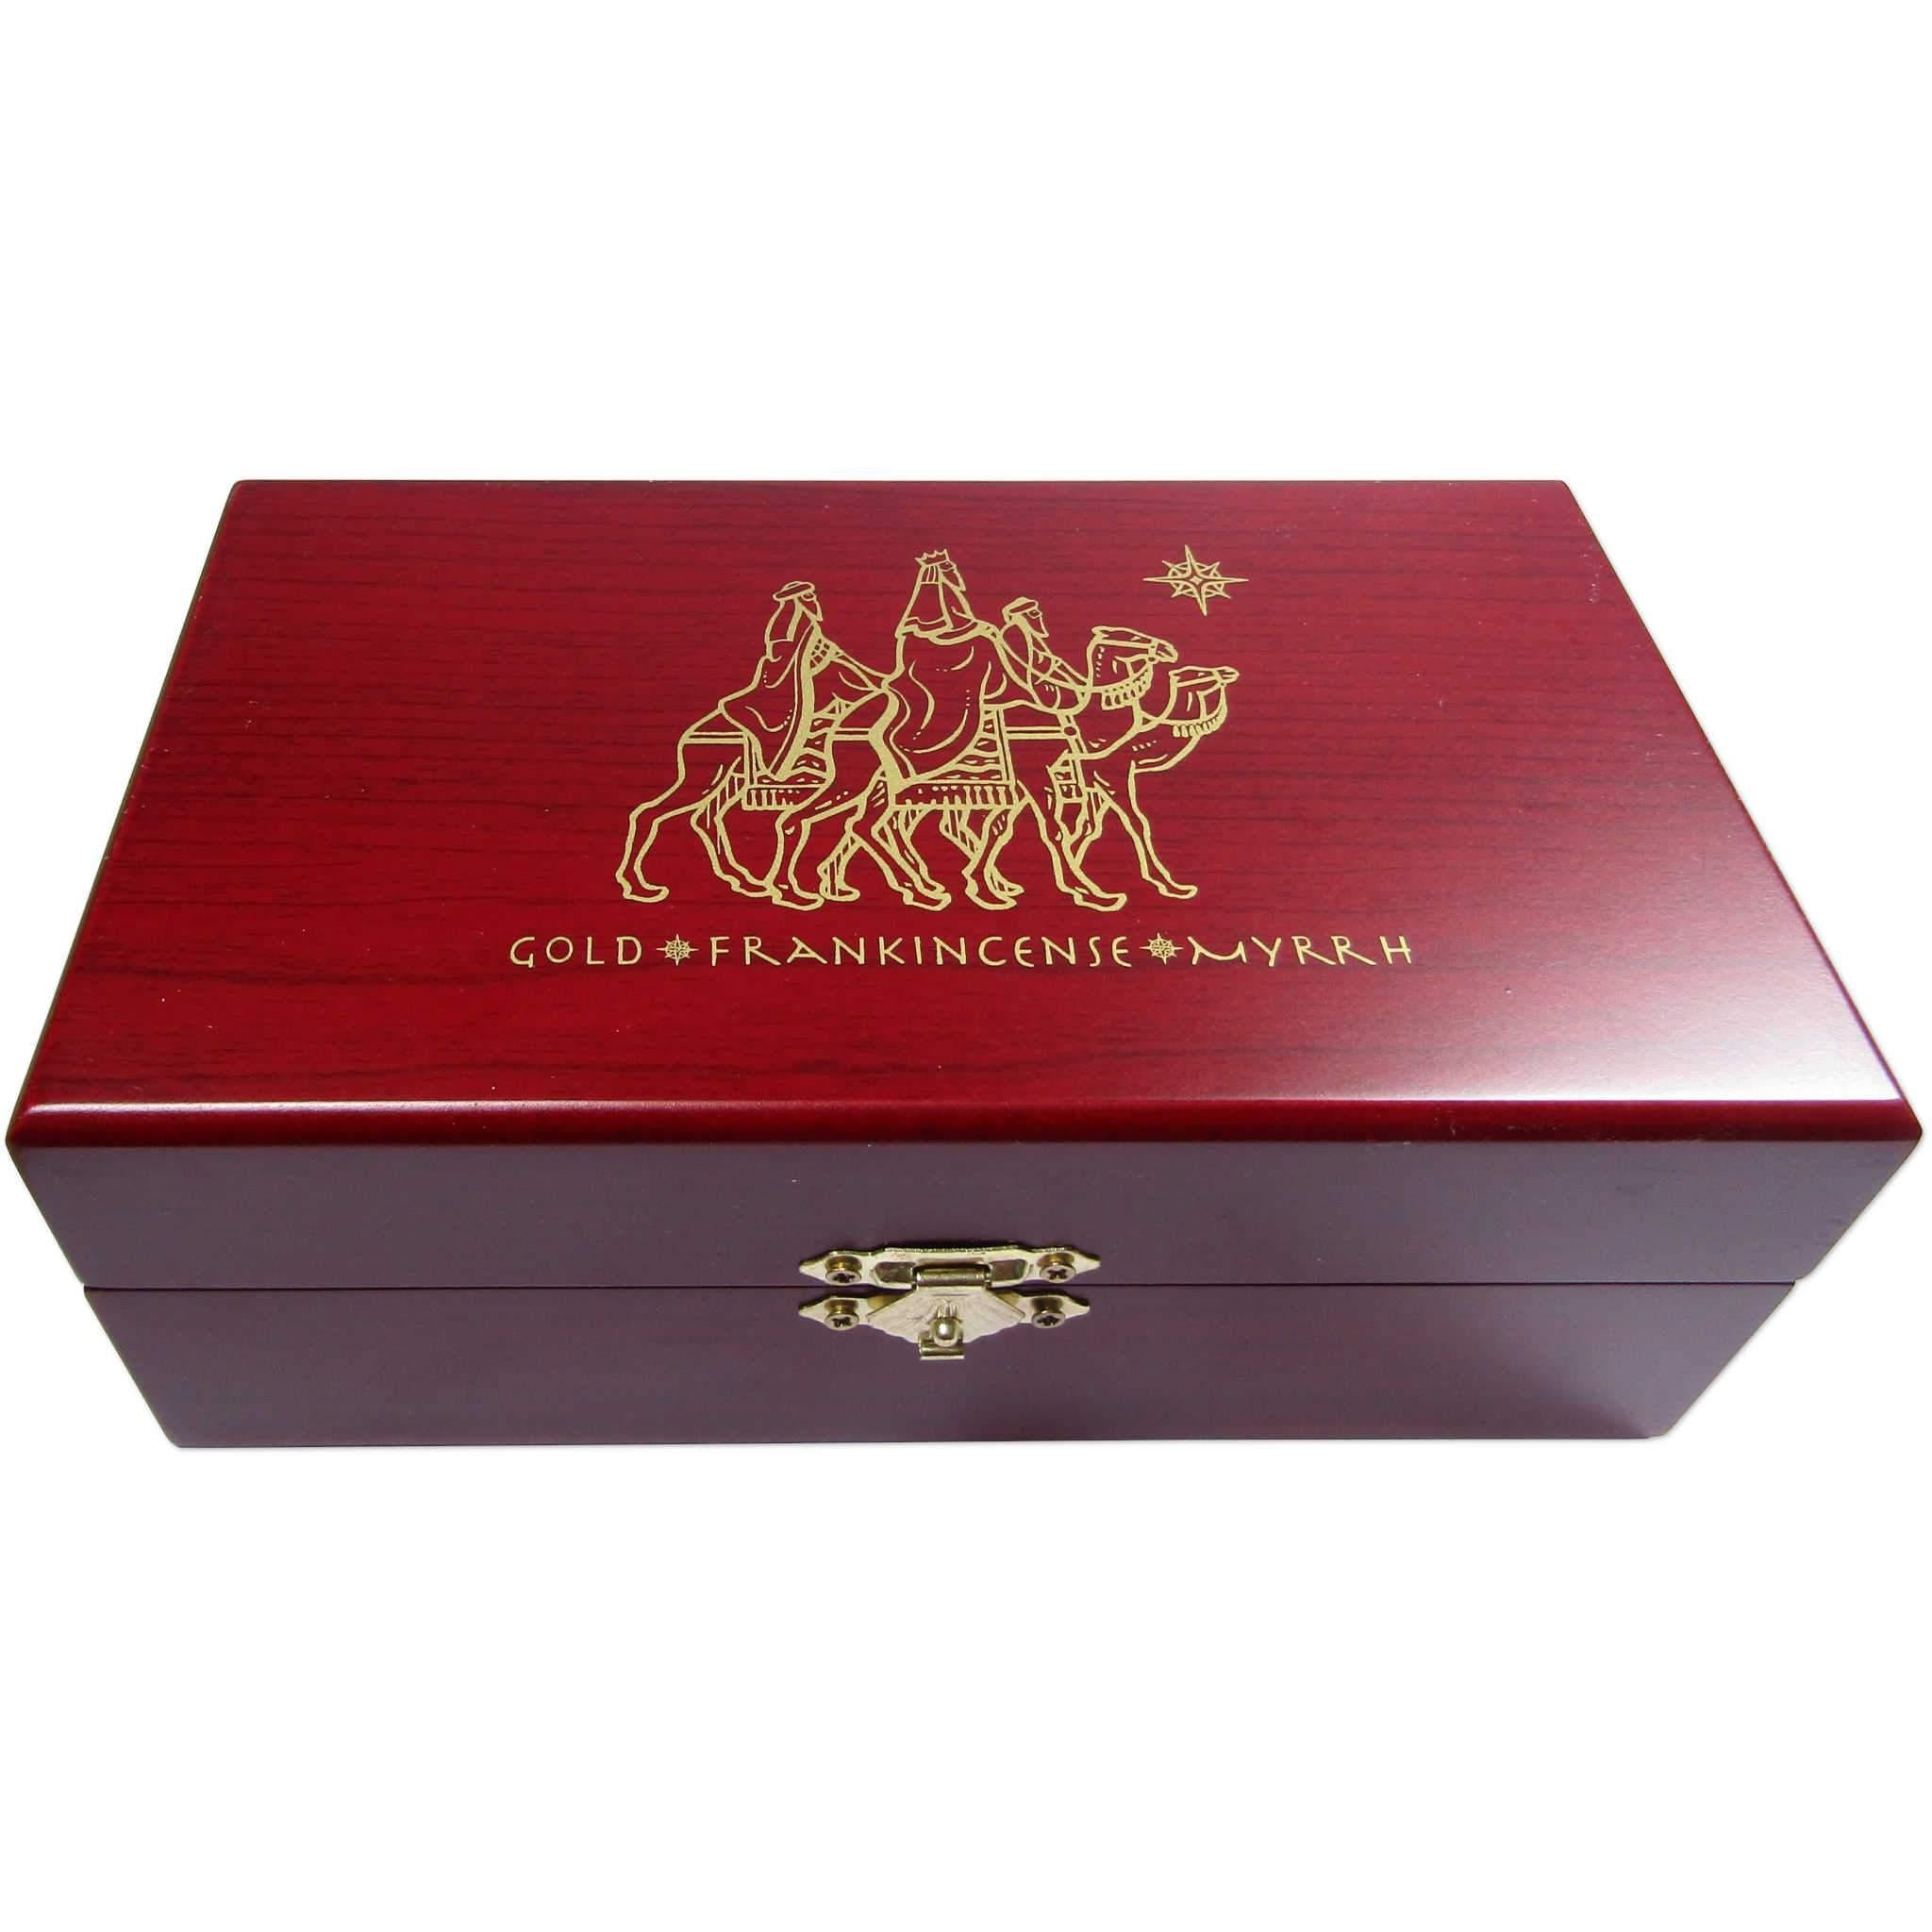 The Original Gifts Of Christmas Gold Frankincense and Myrrh Box Holiday Gift Set